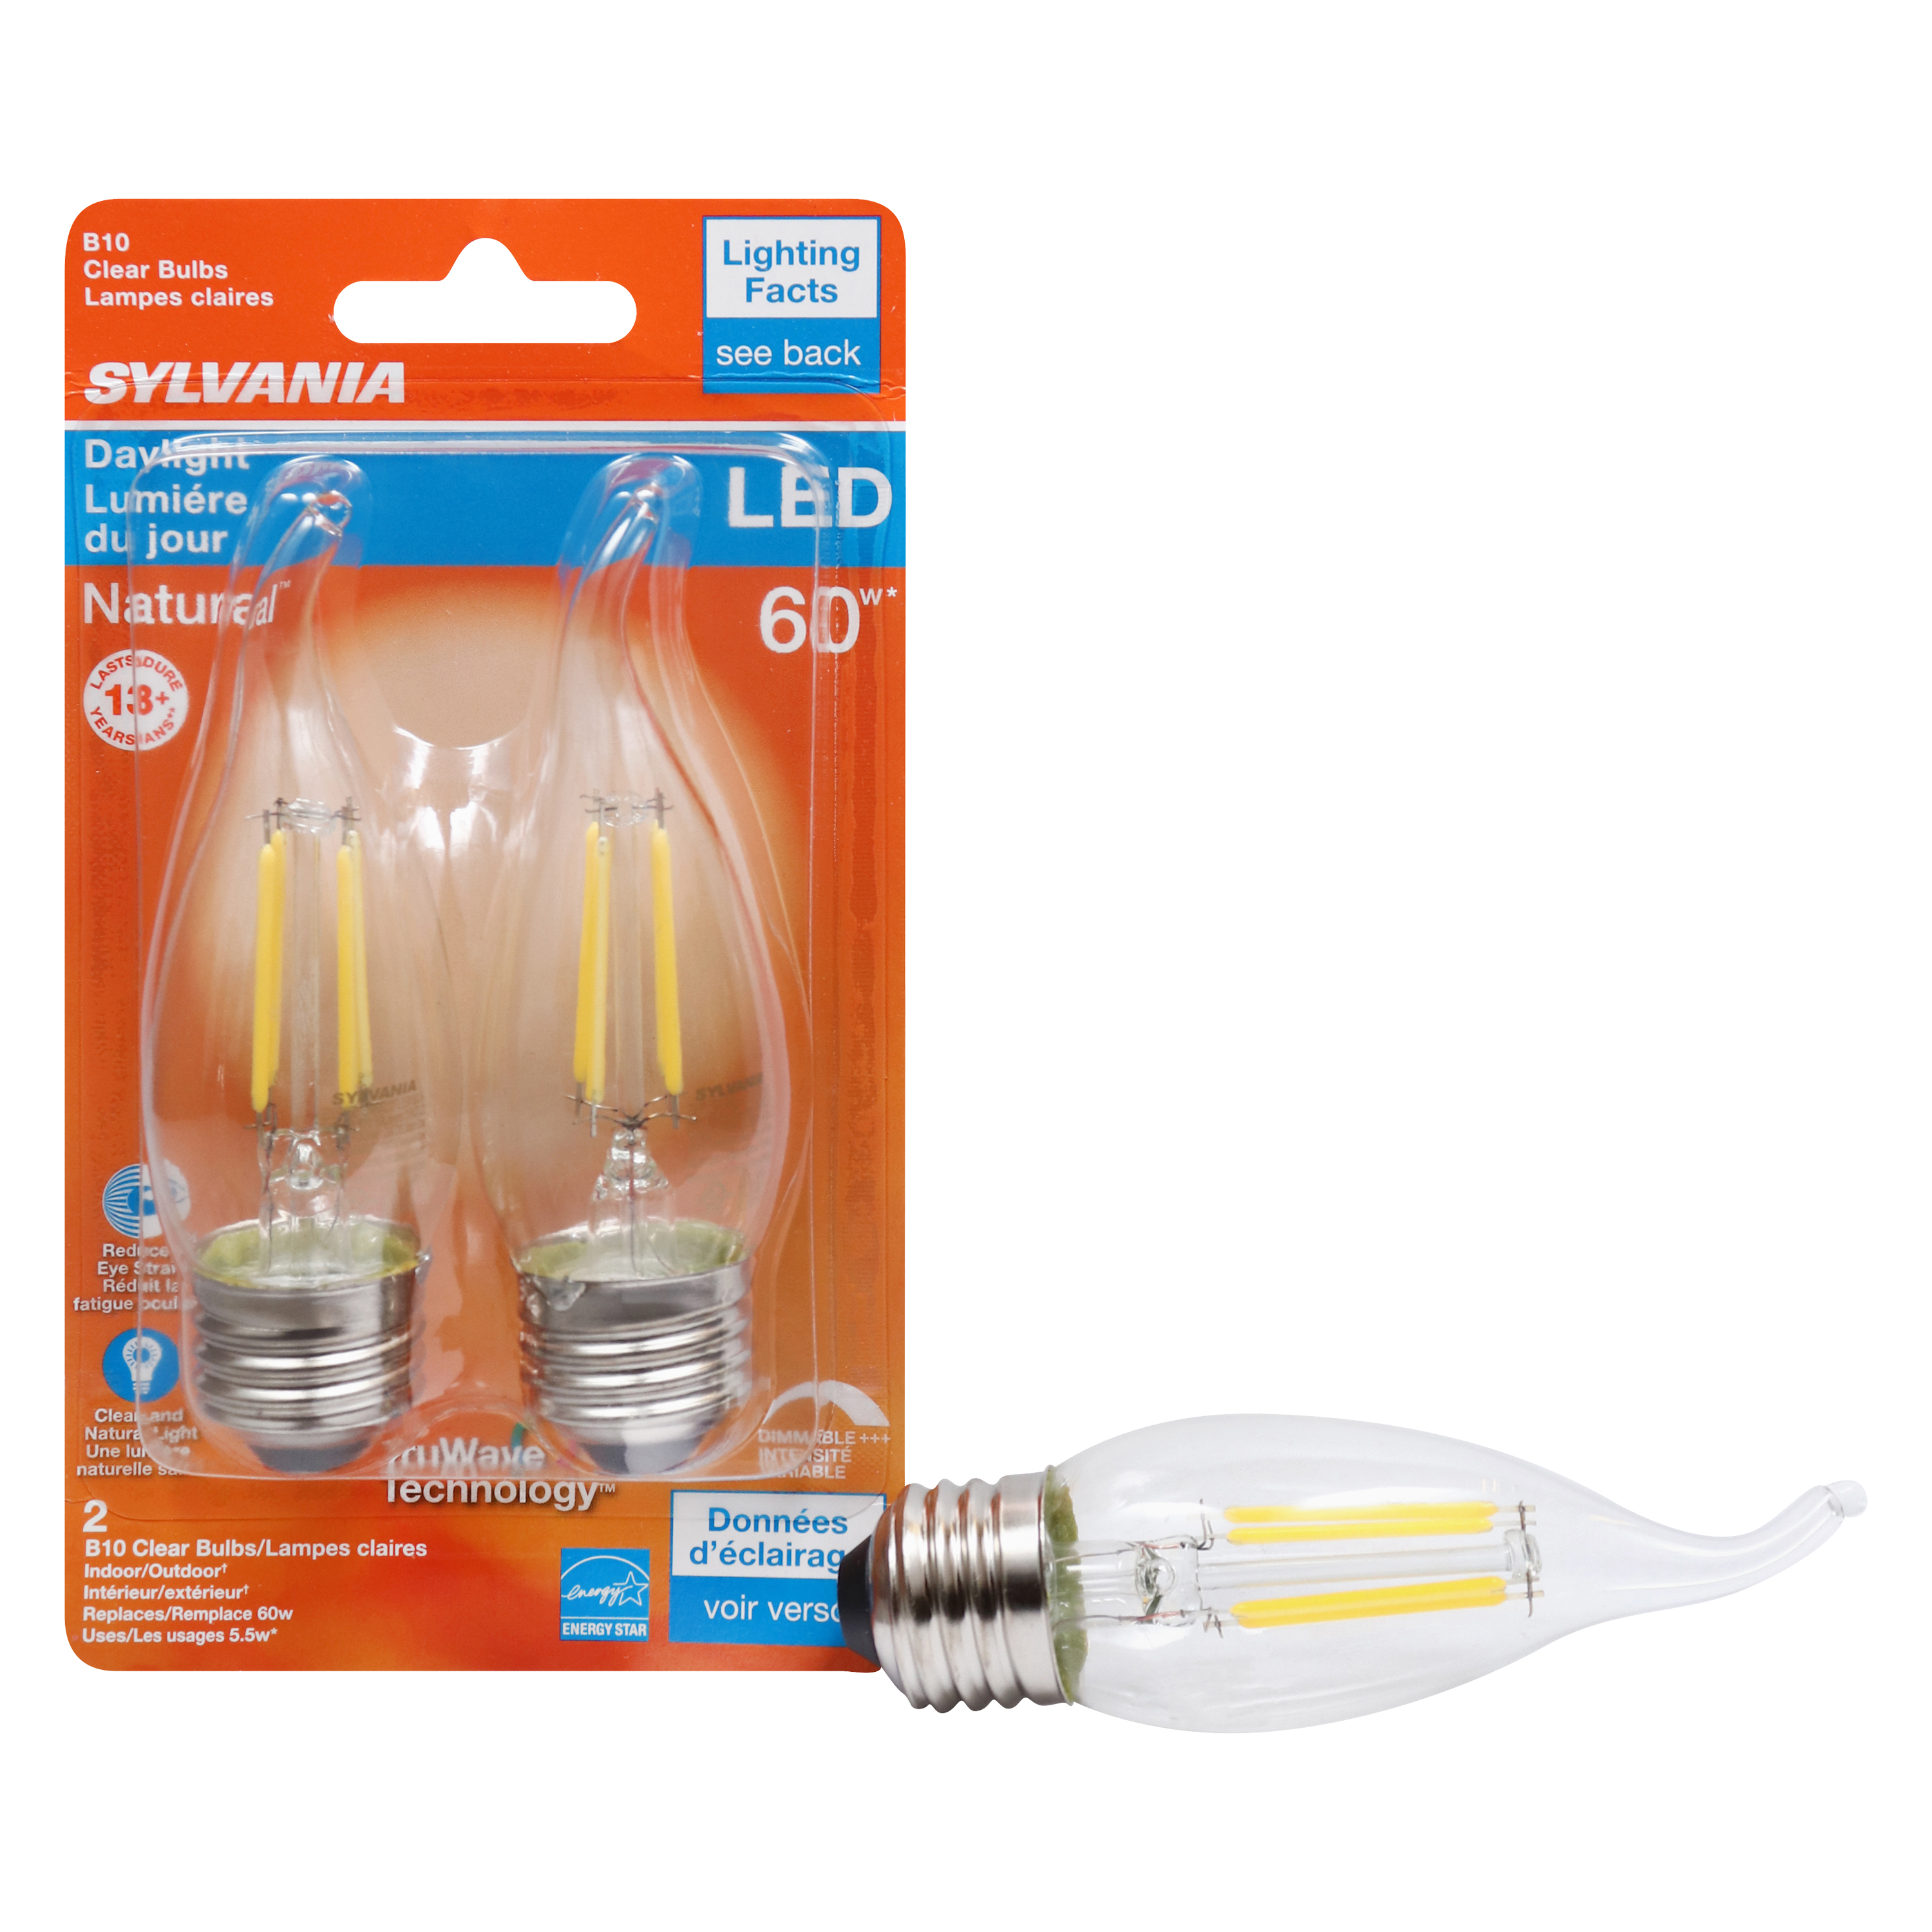 Sylvania 40760 Natural LED Bulb, Decorative, B10 Bent Tip Lamp, 60 W Equivalent, E26 Lamp Base, Dimmable, Clear